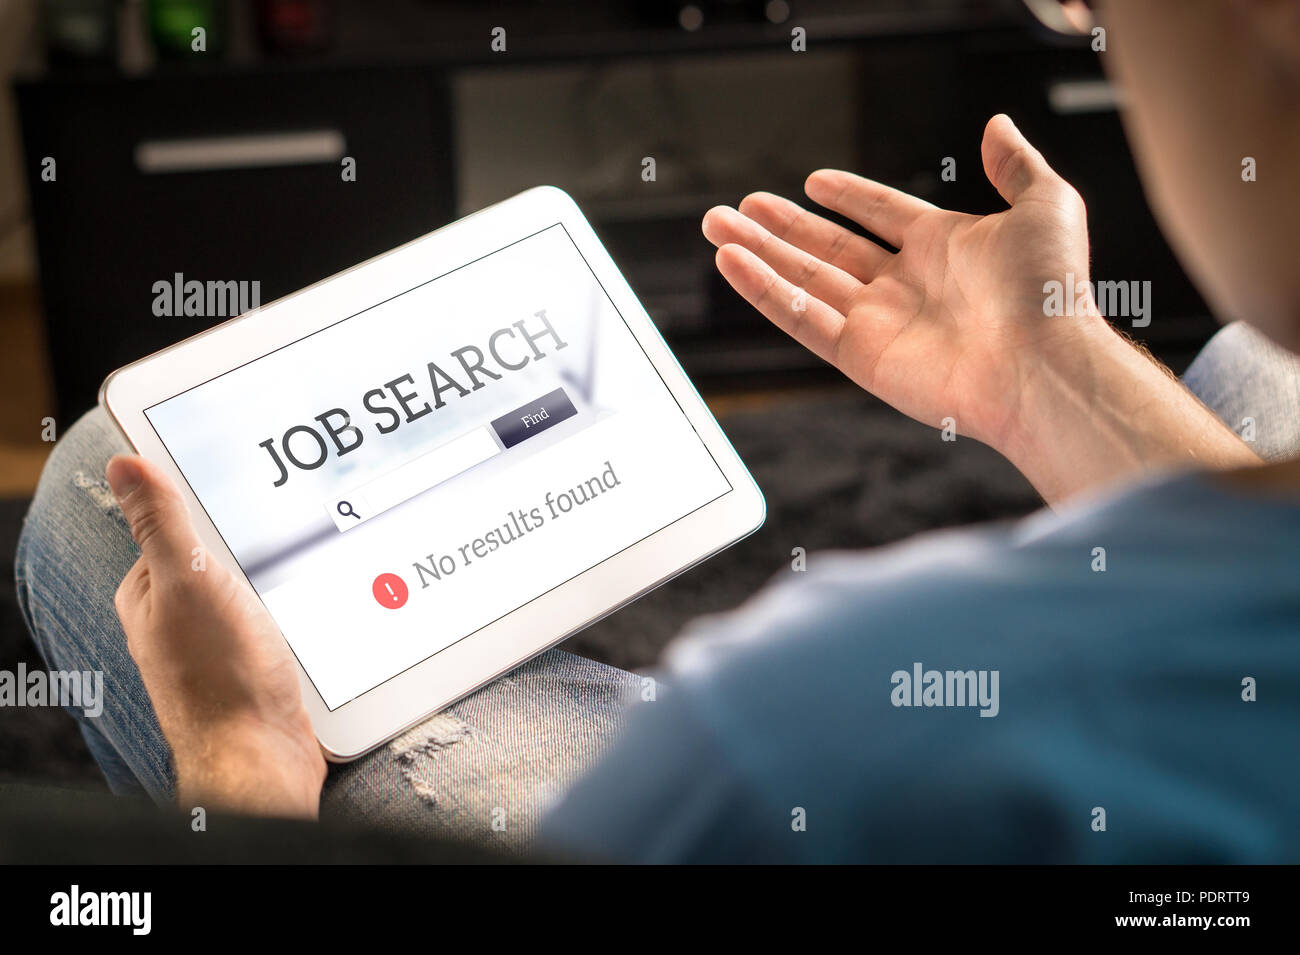 Unemployment and job search problem. Unhappy and frustrated man can't find work with tablet. No results found in online search engine. Stock Photo